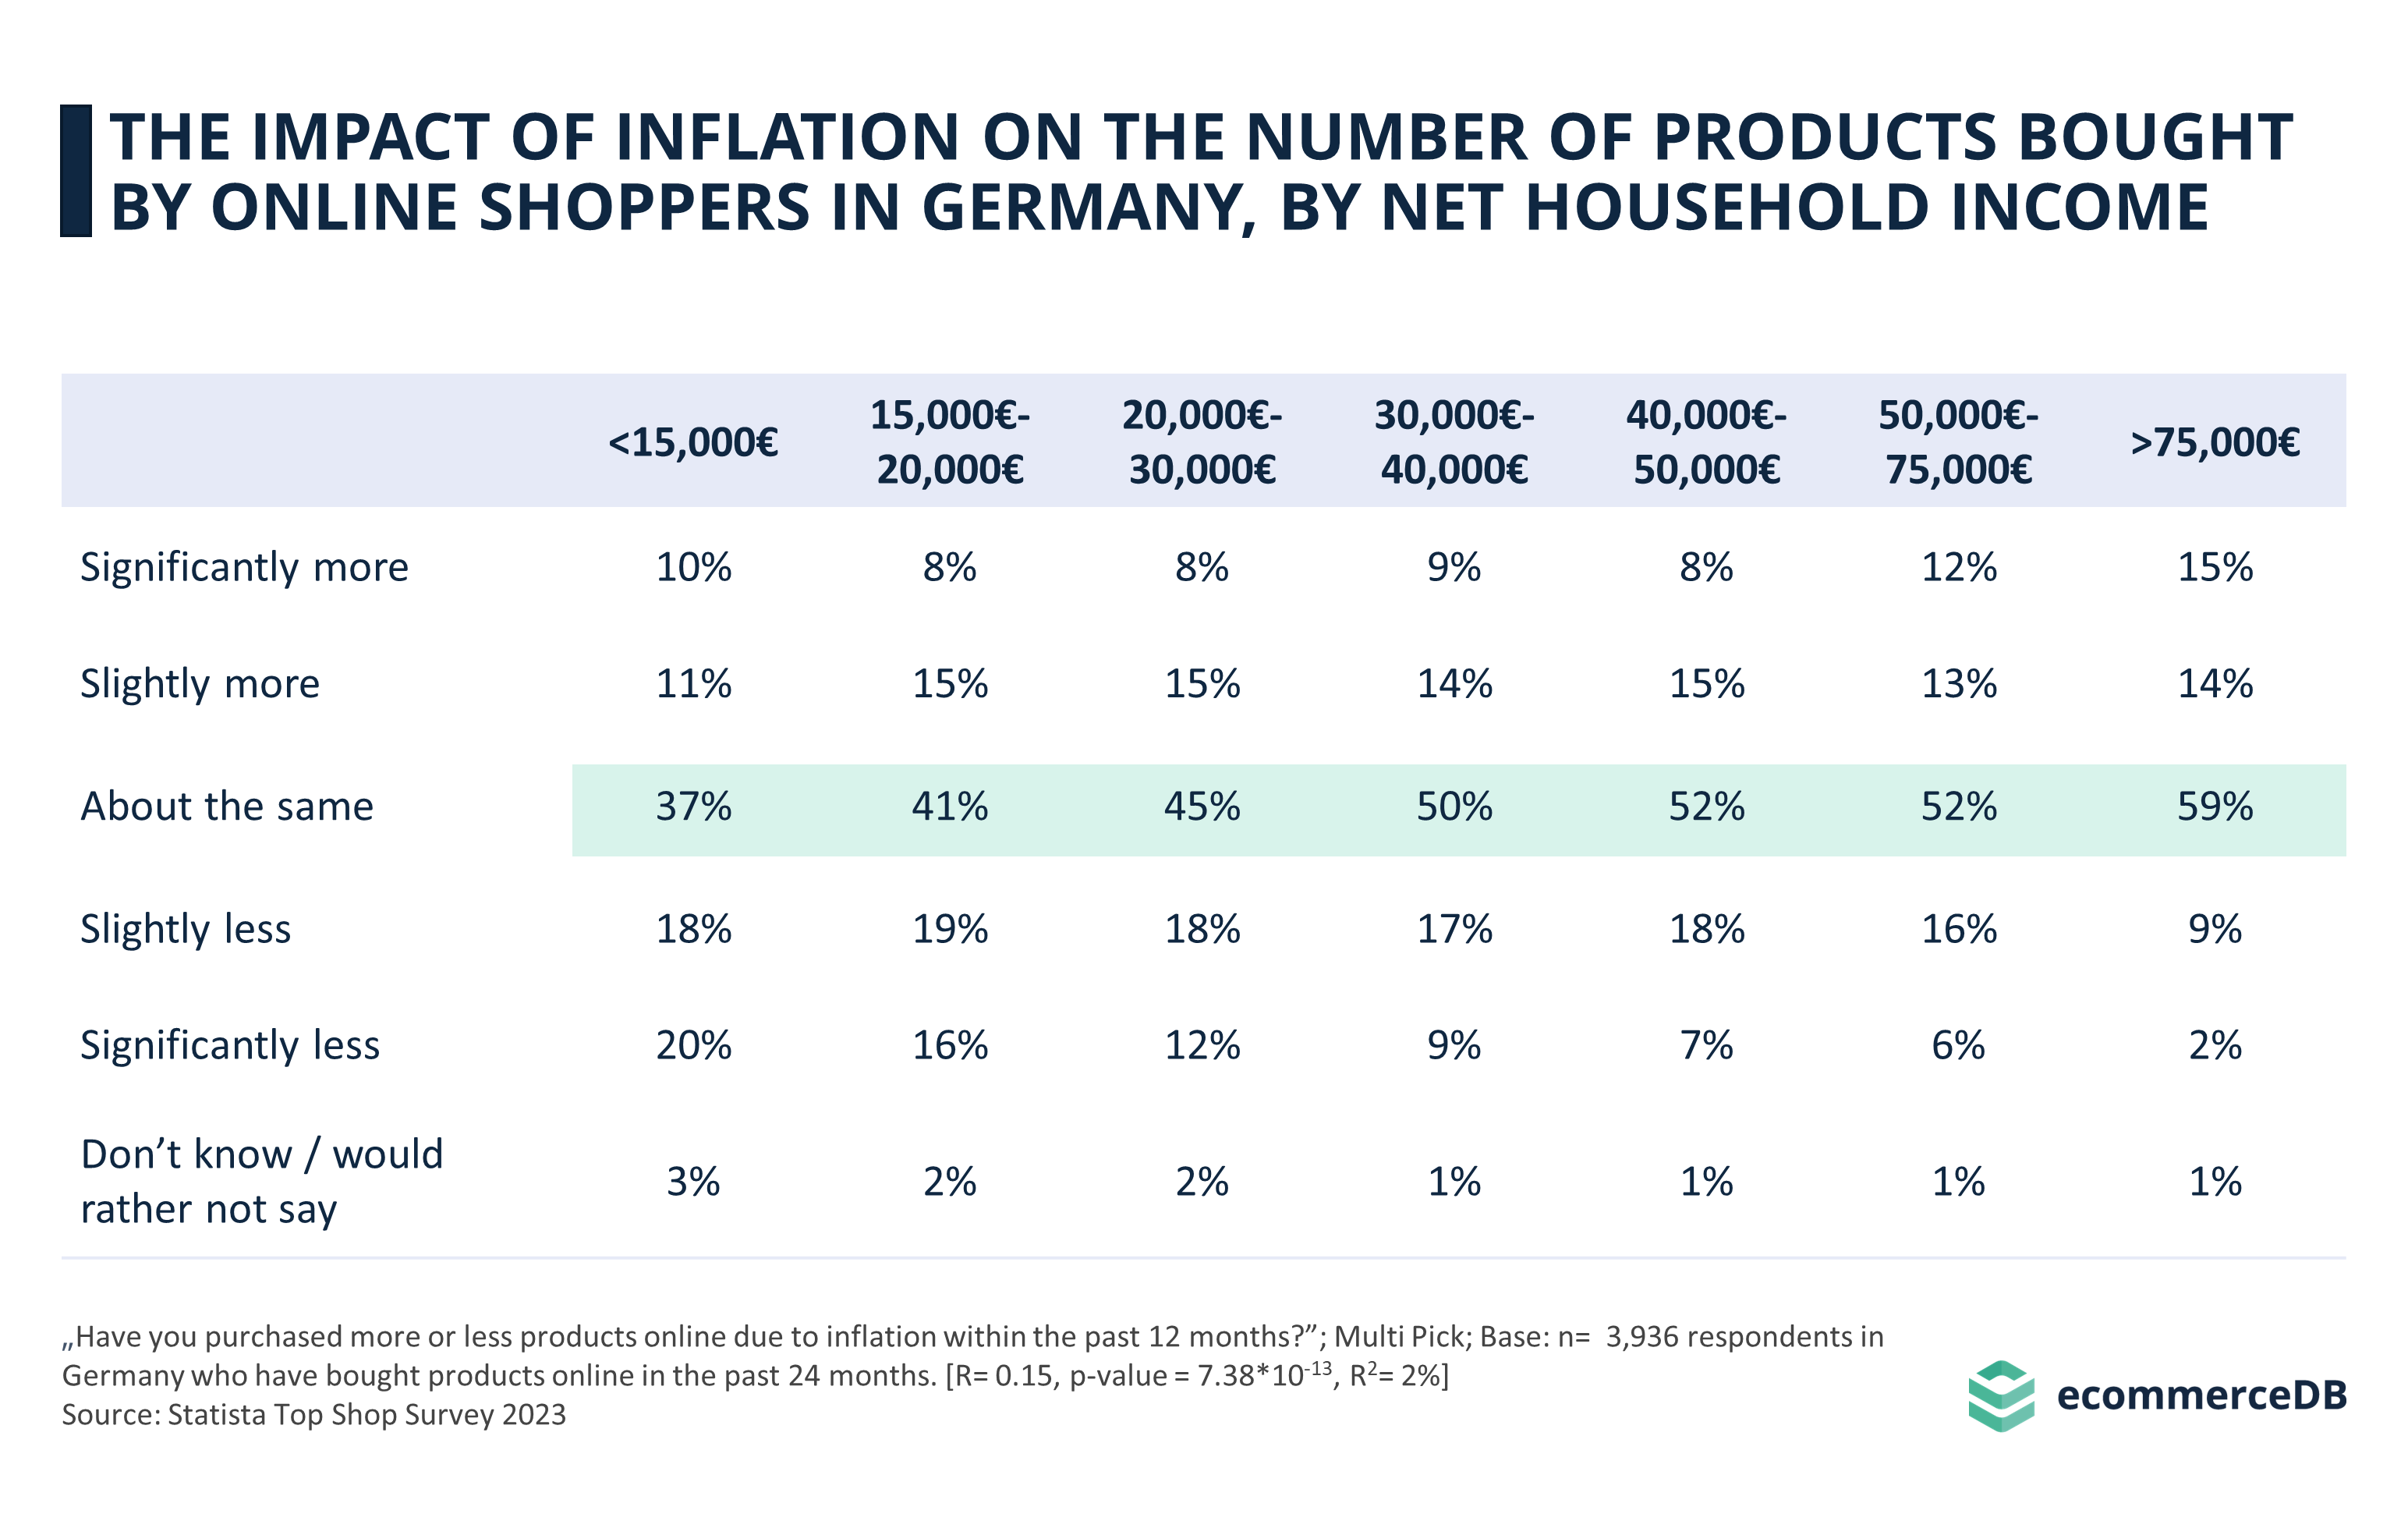 Impact of Inflation Online Shopping by Net Household Income